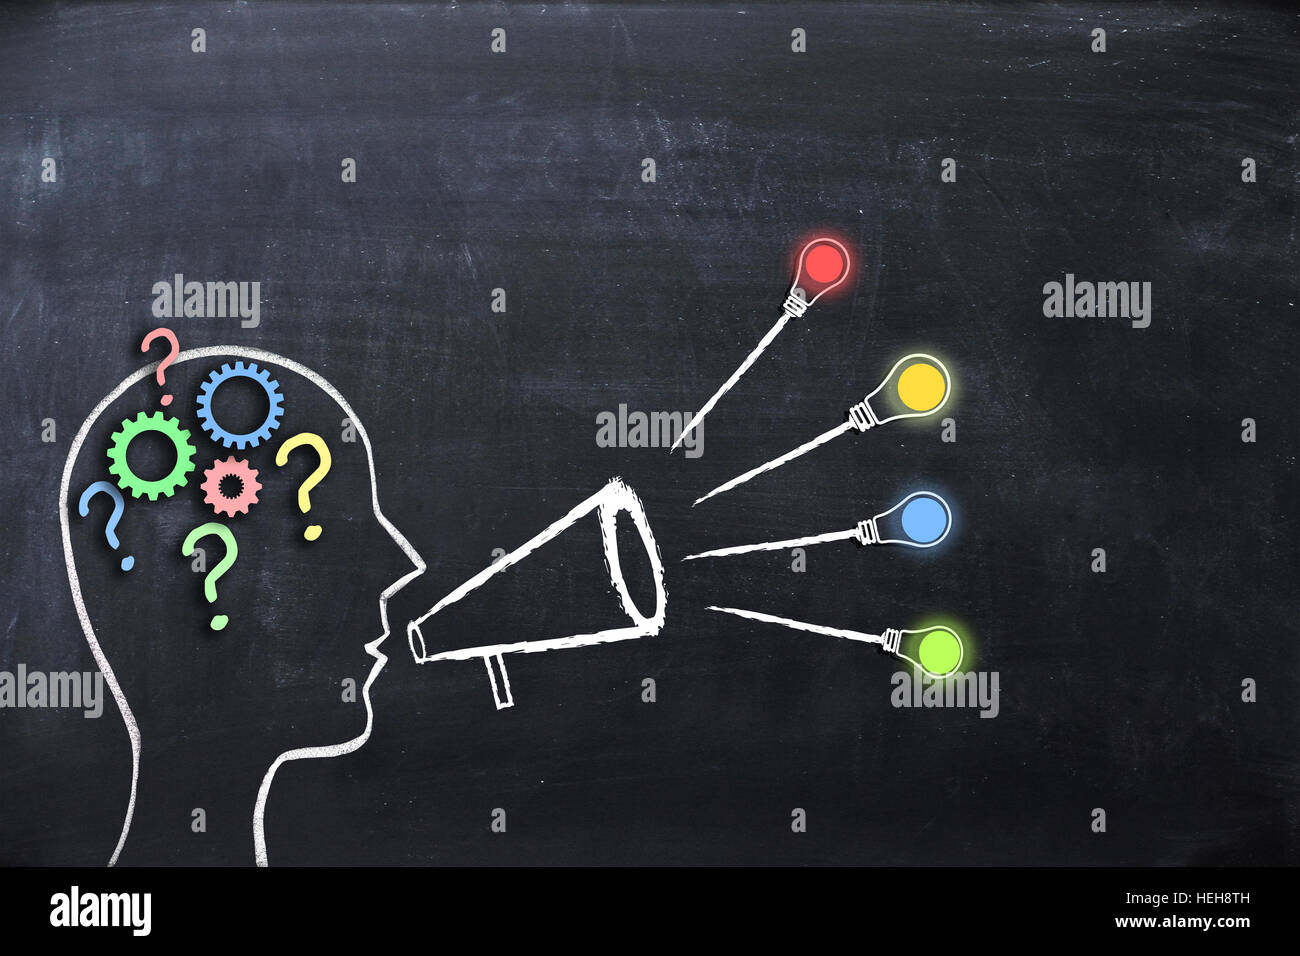 Human head shape with gears and question marks suggesting leadership or coaching concept Stock Photo